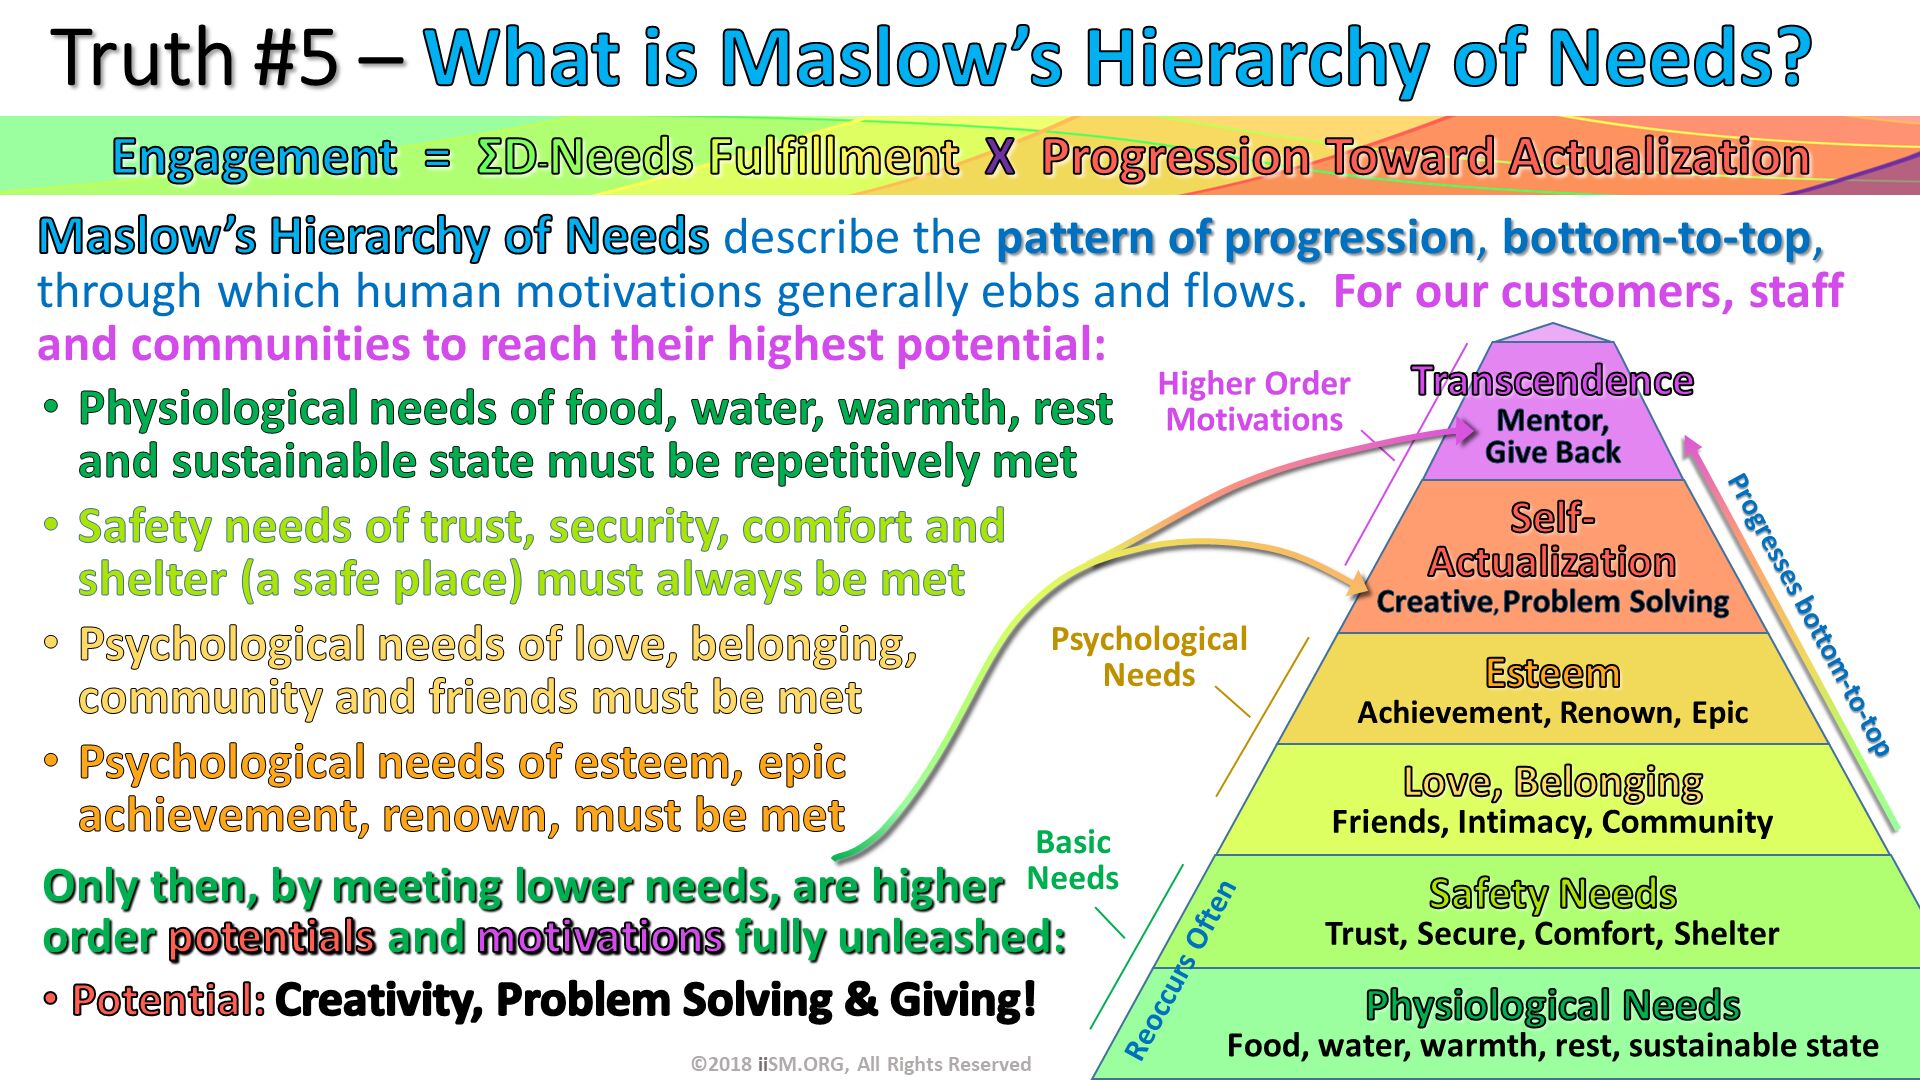 Maslow’s Hierarchy of Needs describe the pattern of progression, bottom-to-top, through which human motivations generally ebbs and flows.  For our customers, staff and communities to reach their highest potential: . Truth #5 – What is Maslow’s Hierarchy of Needs? . 
. ©2018 iiSM.ORG, All Rights Reserved. Only then, by meeting lower needs, are higher order potentials and motivations fully unleashed:
Potential: Creativity, Problem Solving & Giving!. Physiological needs of food, water, warmth, rest and sustainable state must be repetitively met
Safety needs of trust, security, comfort and shelter (a safe place) must always be met
Psychological needs of love, belonging, community and friends must be met
Psychological needs of esteem, epic achievement, renown, must be met. Progresses bottom-to-top. Reoccurs Often. Engagement  =  ΣD-Needs Fulfillment  X  Progression Toward Actualization. 